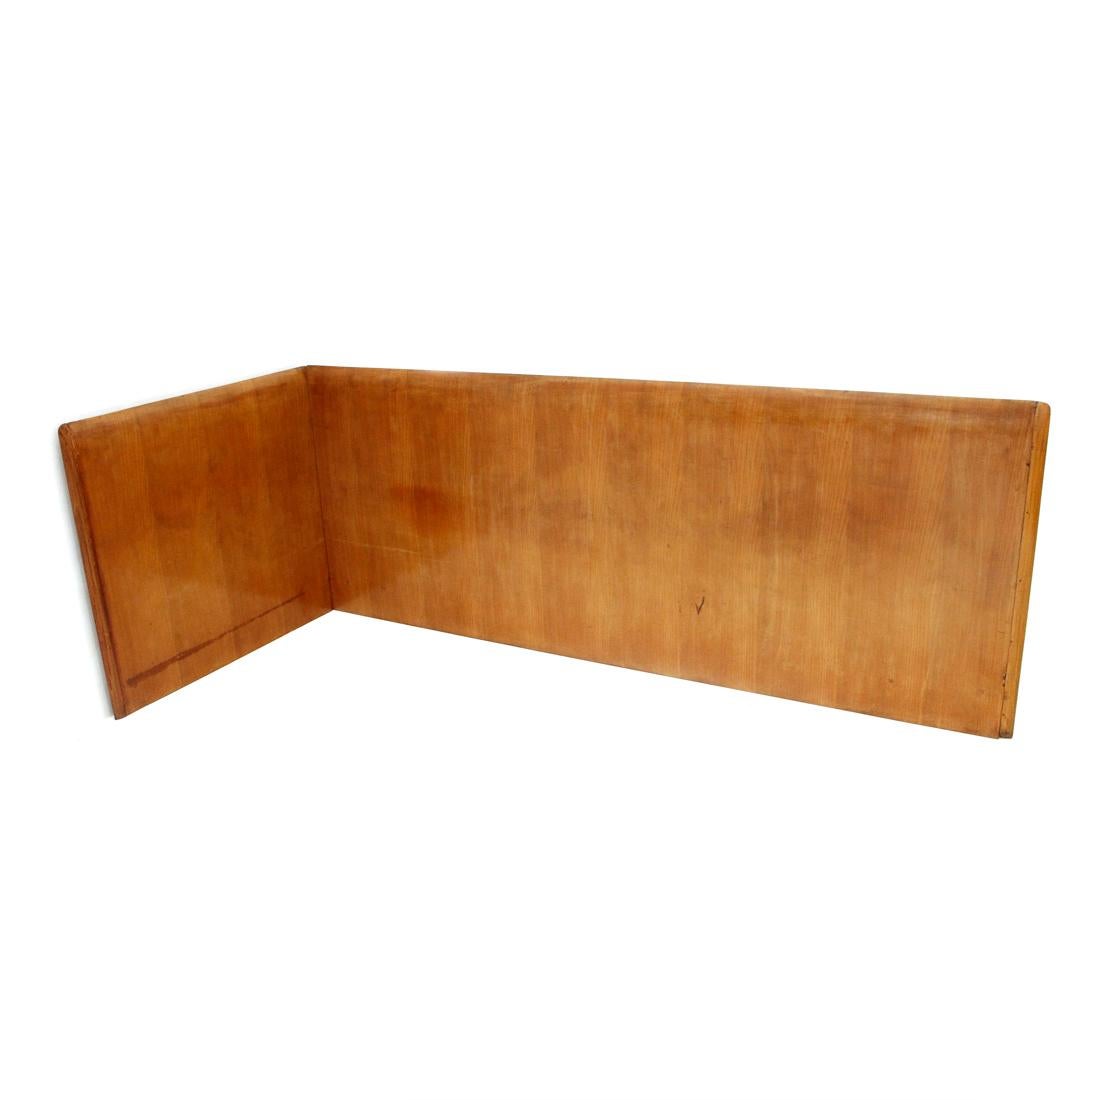 Bed headboard and side edge of Italian manufacture produced in the 1950s.
Veneered wood structure, tapered side and top edges.
Good general condition, some signs, stains and lack of veneer due to normal use over time.

Dimensions: Length 204 cm,